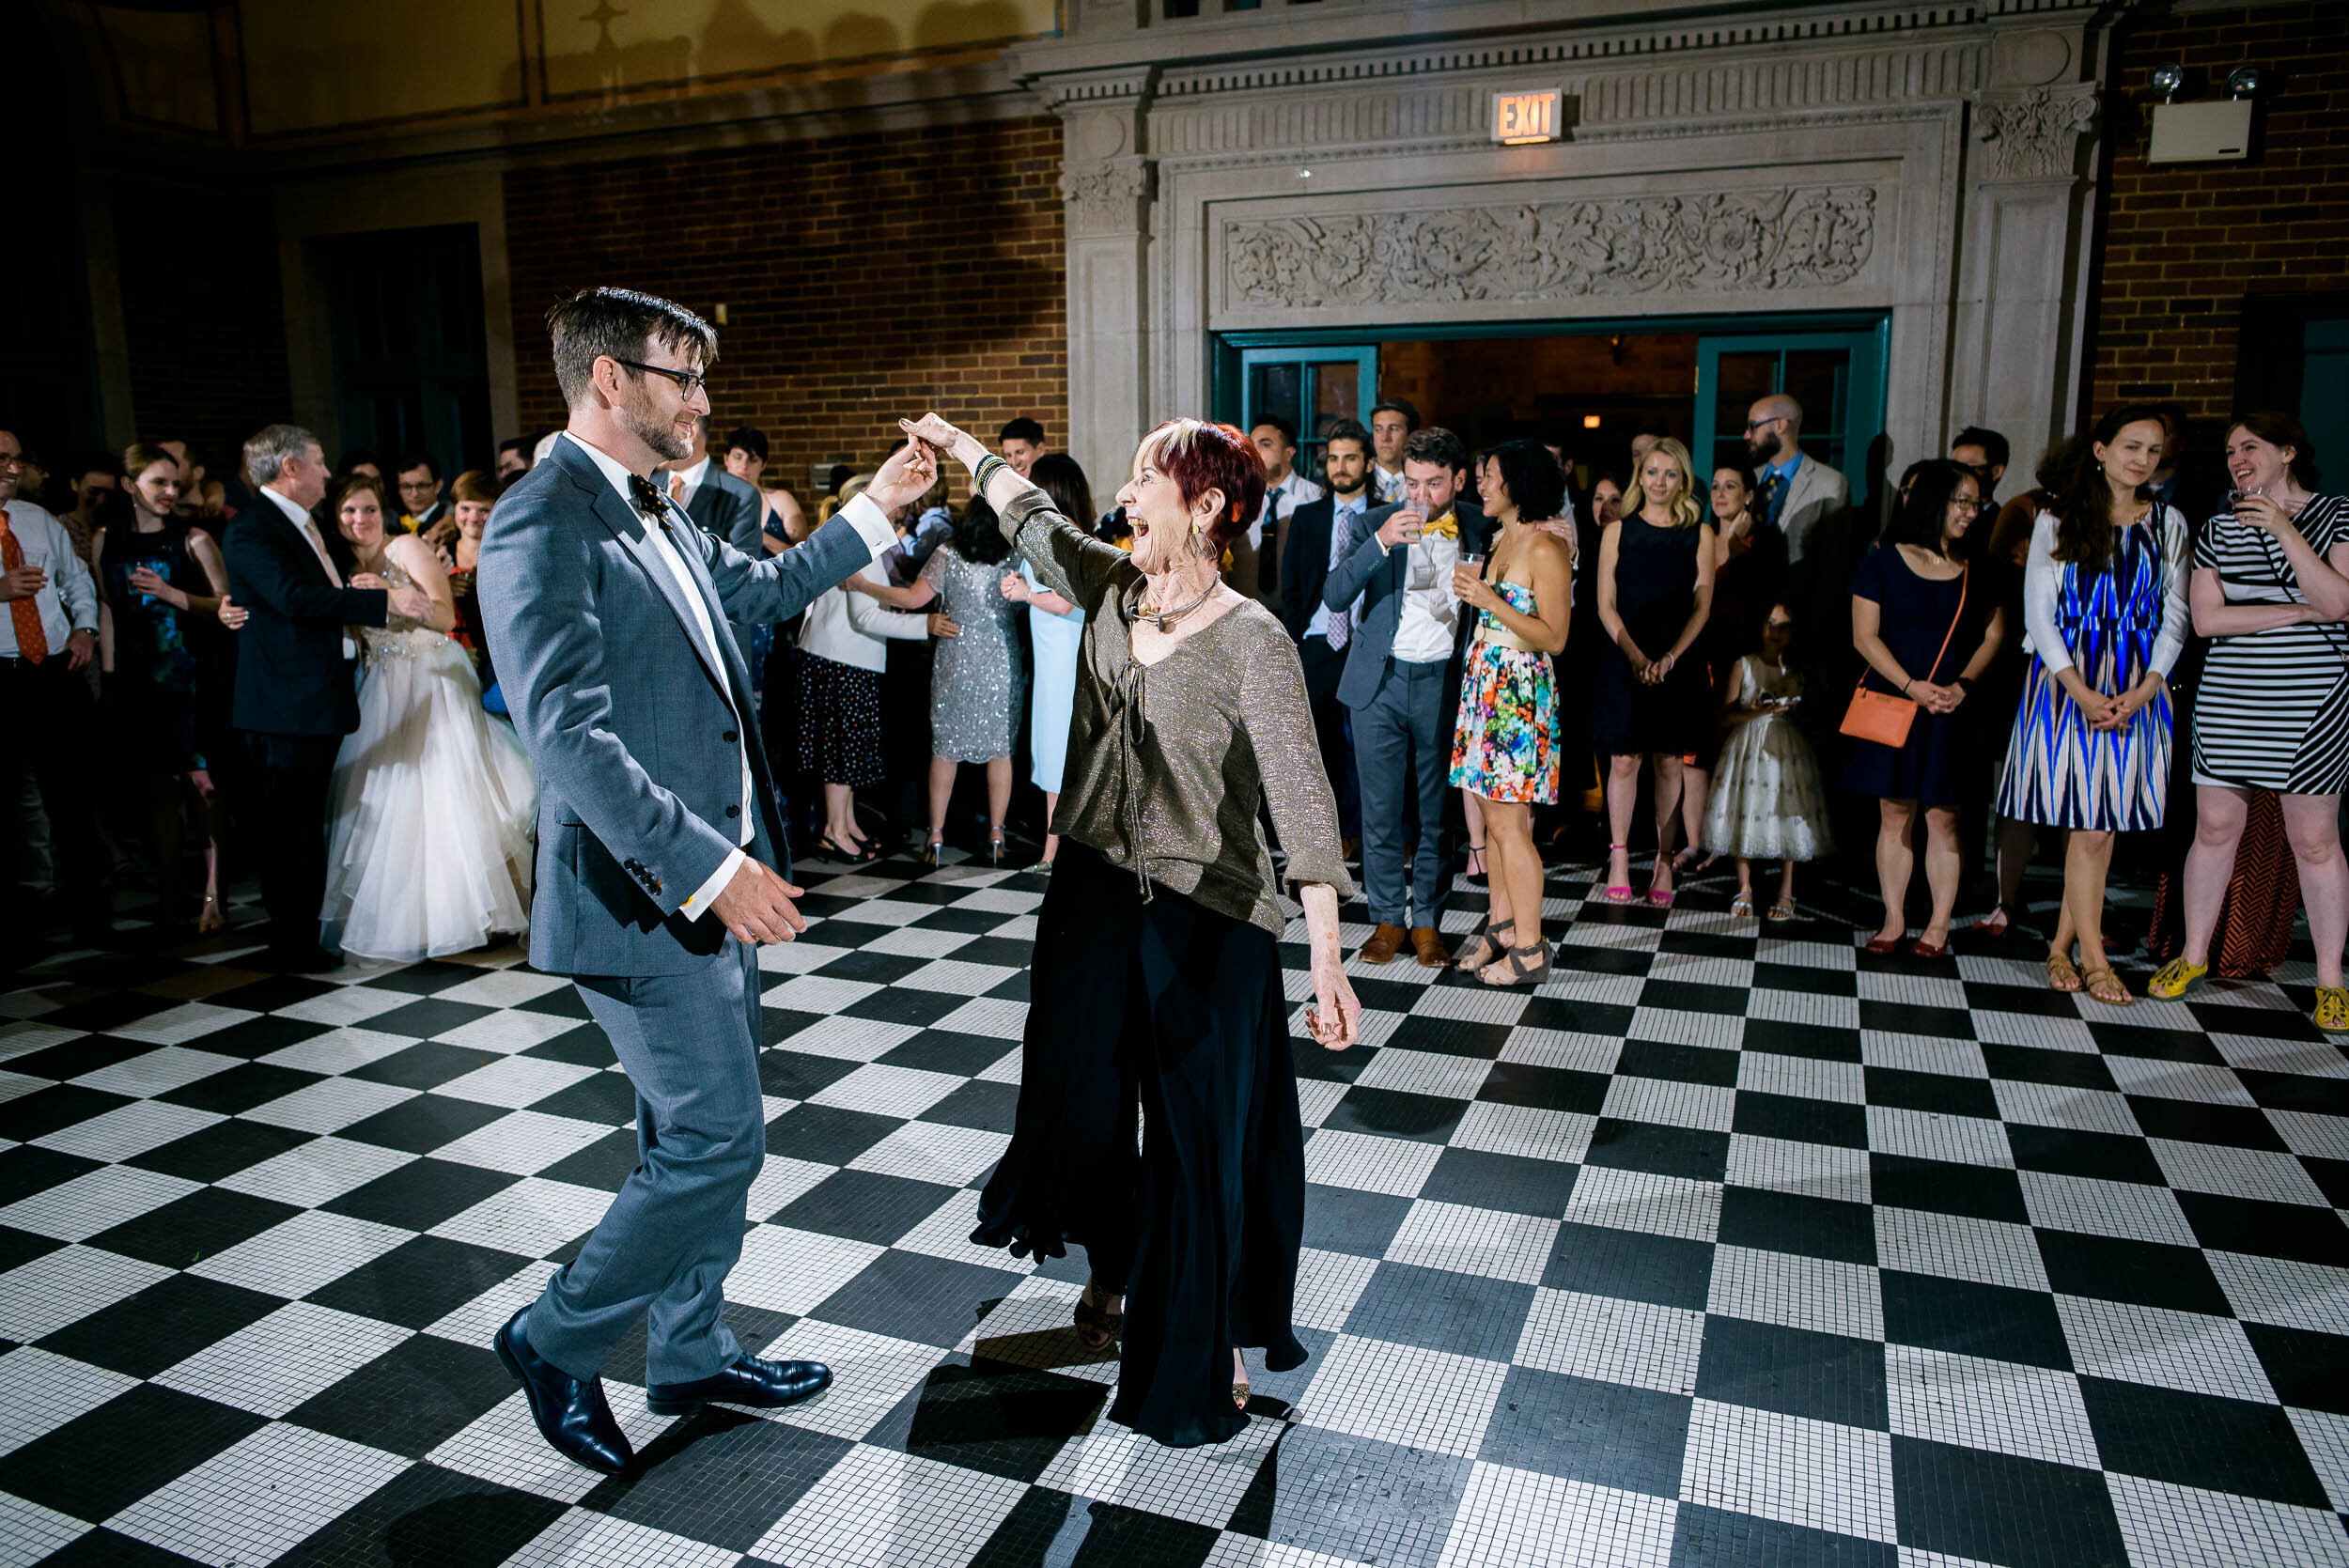 Mother son dance during the reception: Columbus Park Refectory Chicago wedding captured by J. Brown Photography.